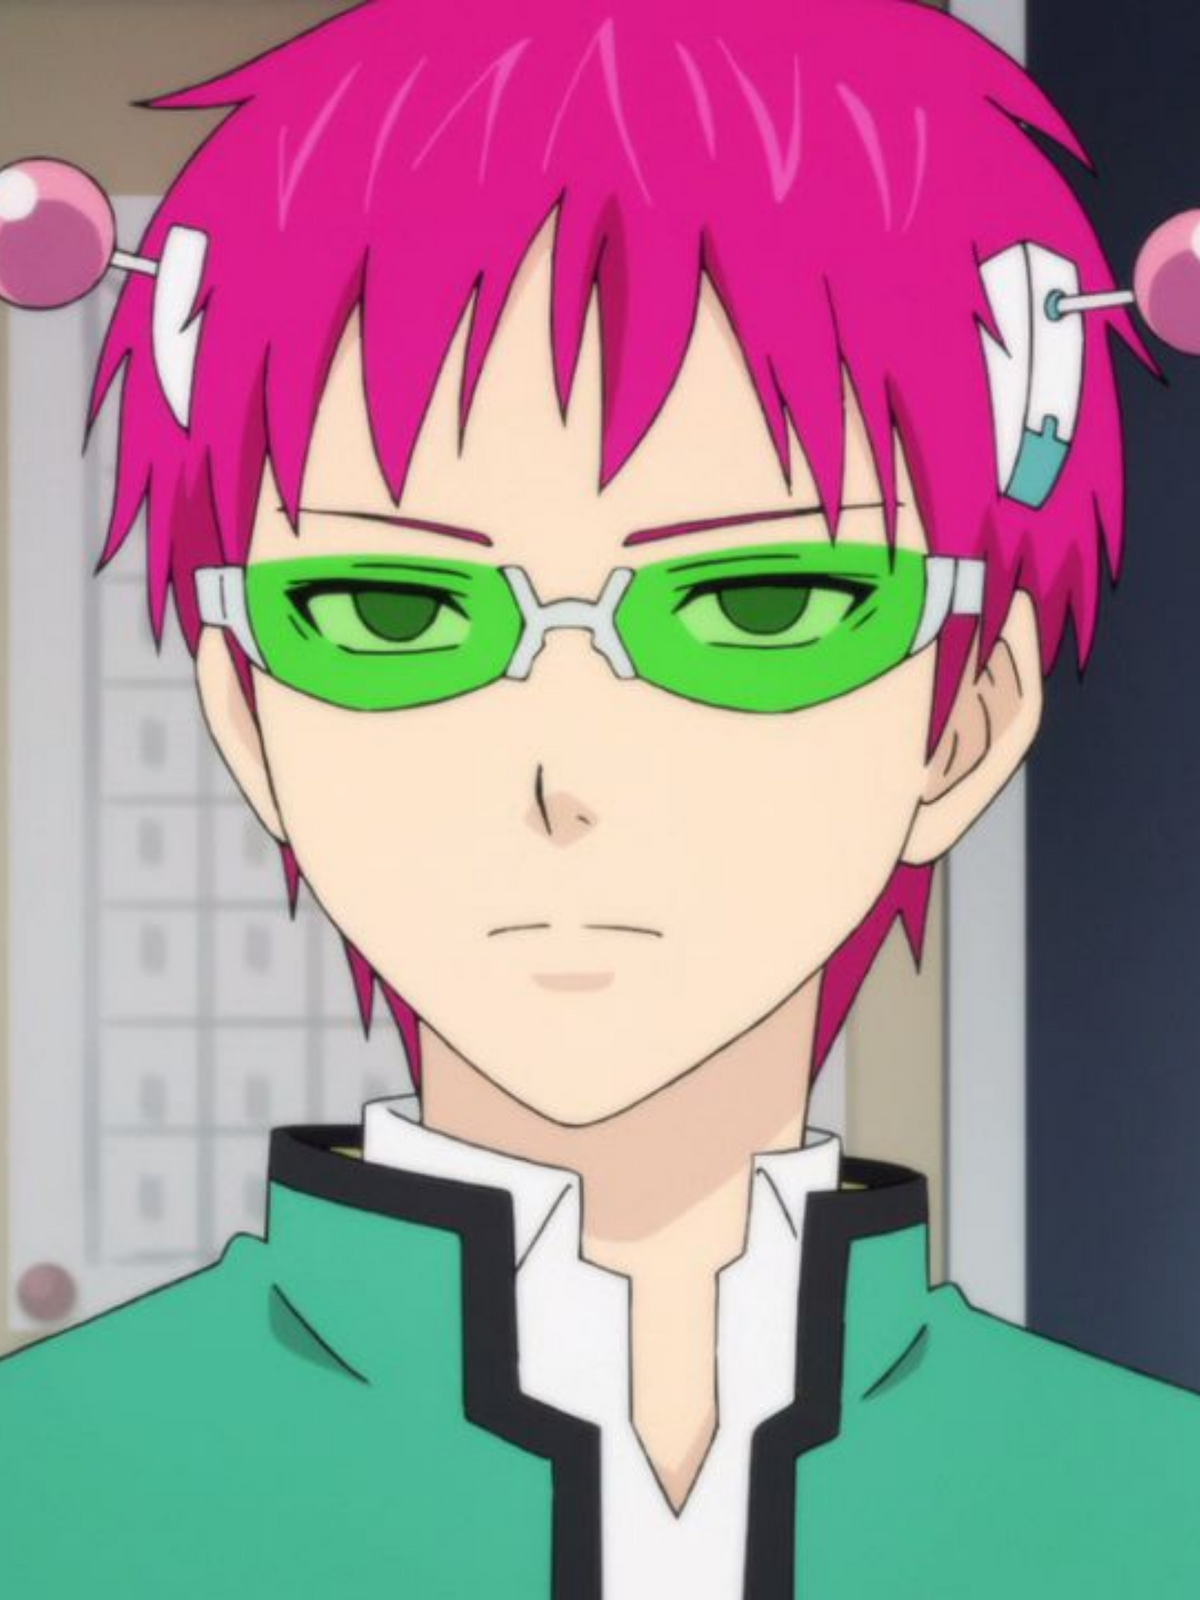 The Disastrous Life of Saiki K. / Characters - TV Tropes